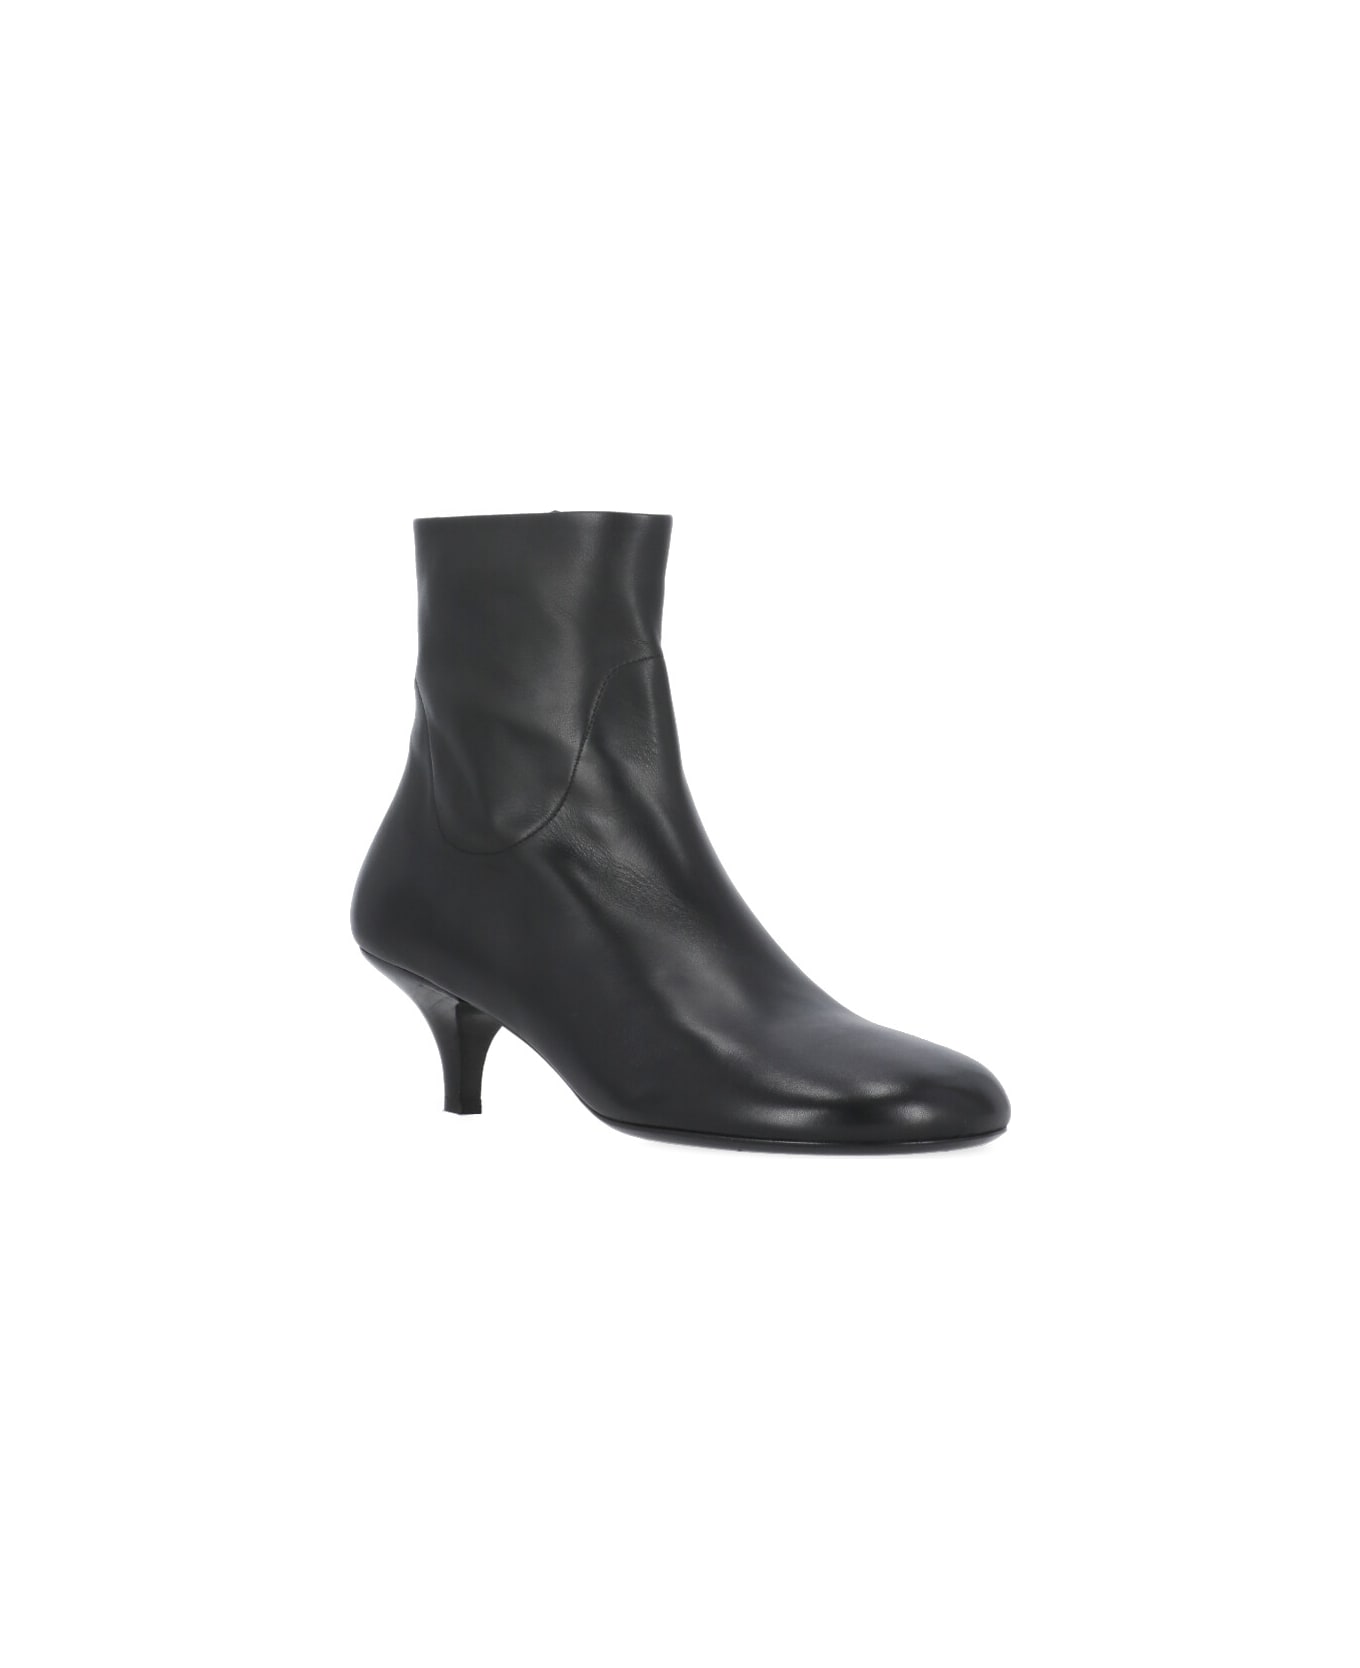 Marsell Spilla Ankle Boots - Black